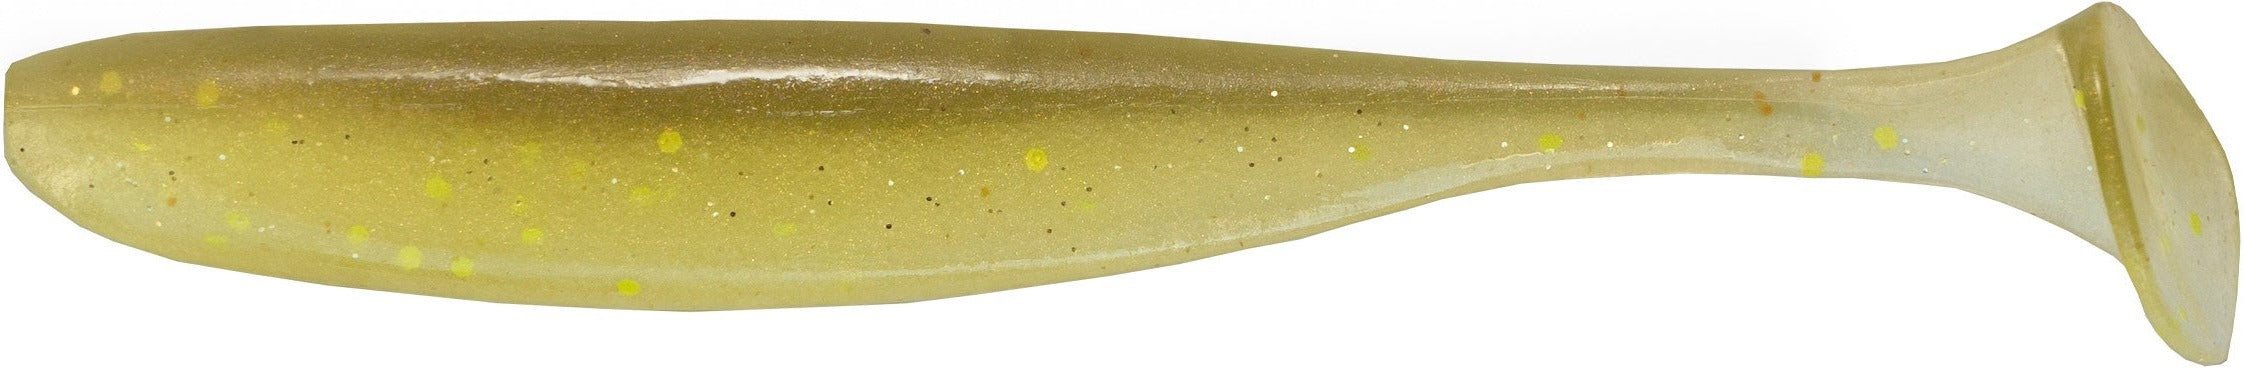  ZRUOYI Paddle Tail Swimbaits 2 Inch Two-Tone Color